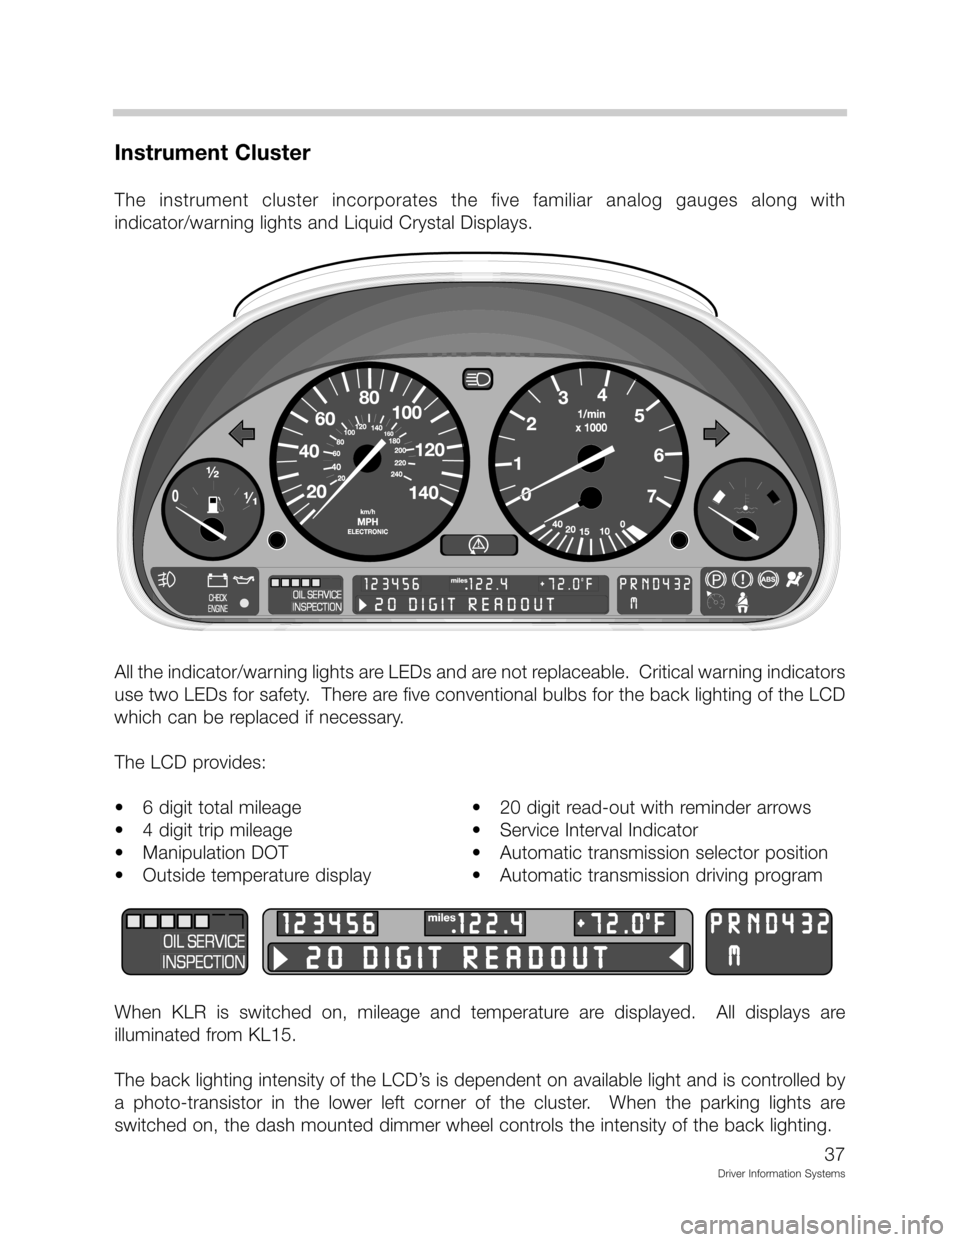 BMW Z3 CONVERTIBLE 2002 E36 Driver Information Systems Manual 
		
 	
 
	   ;2 ;

 
 	 
 :
!":
!1D	!


-

!":
1